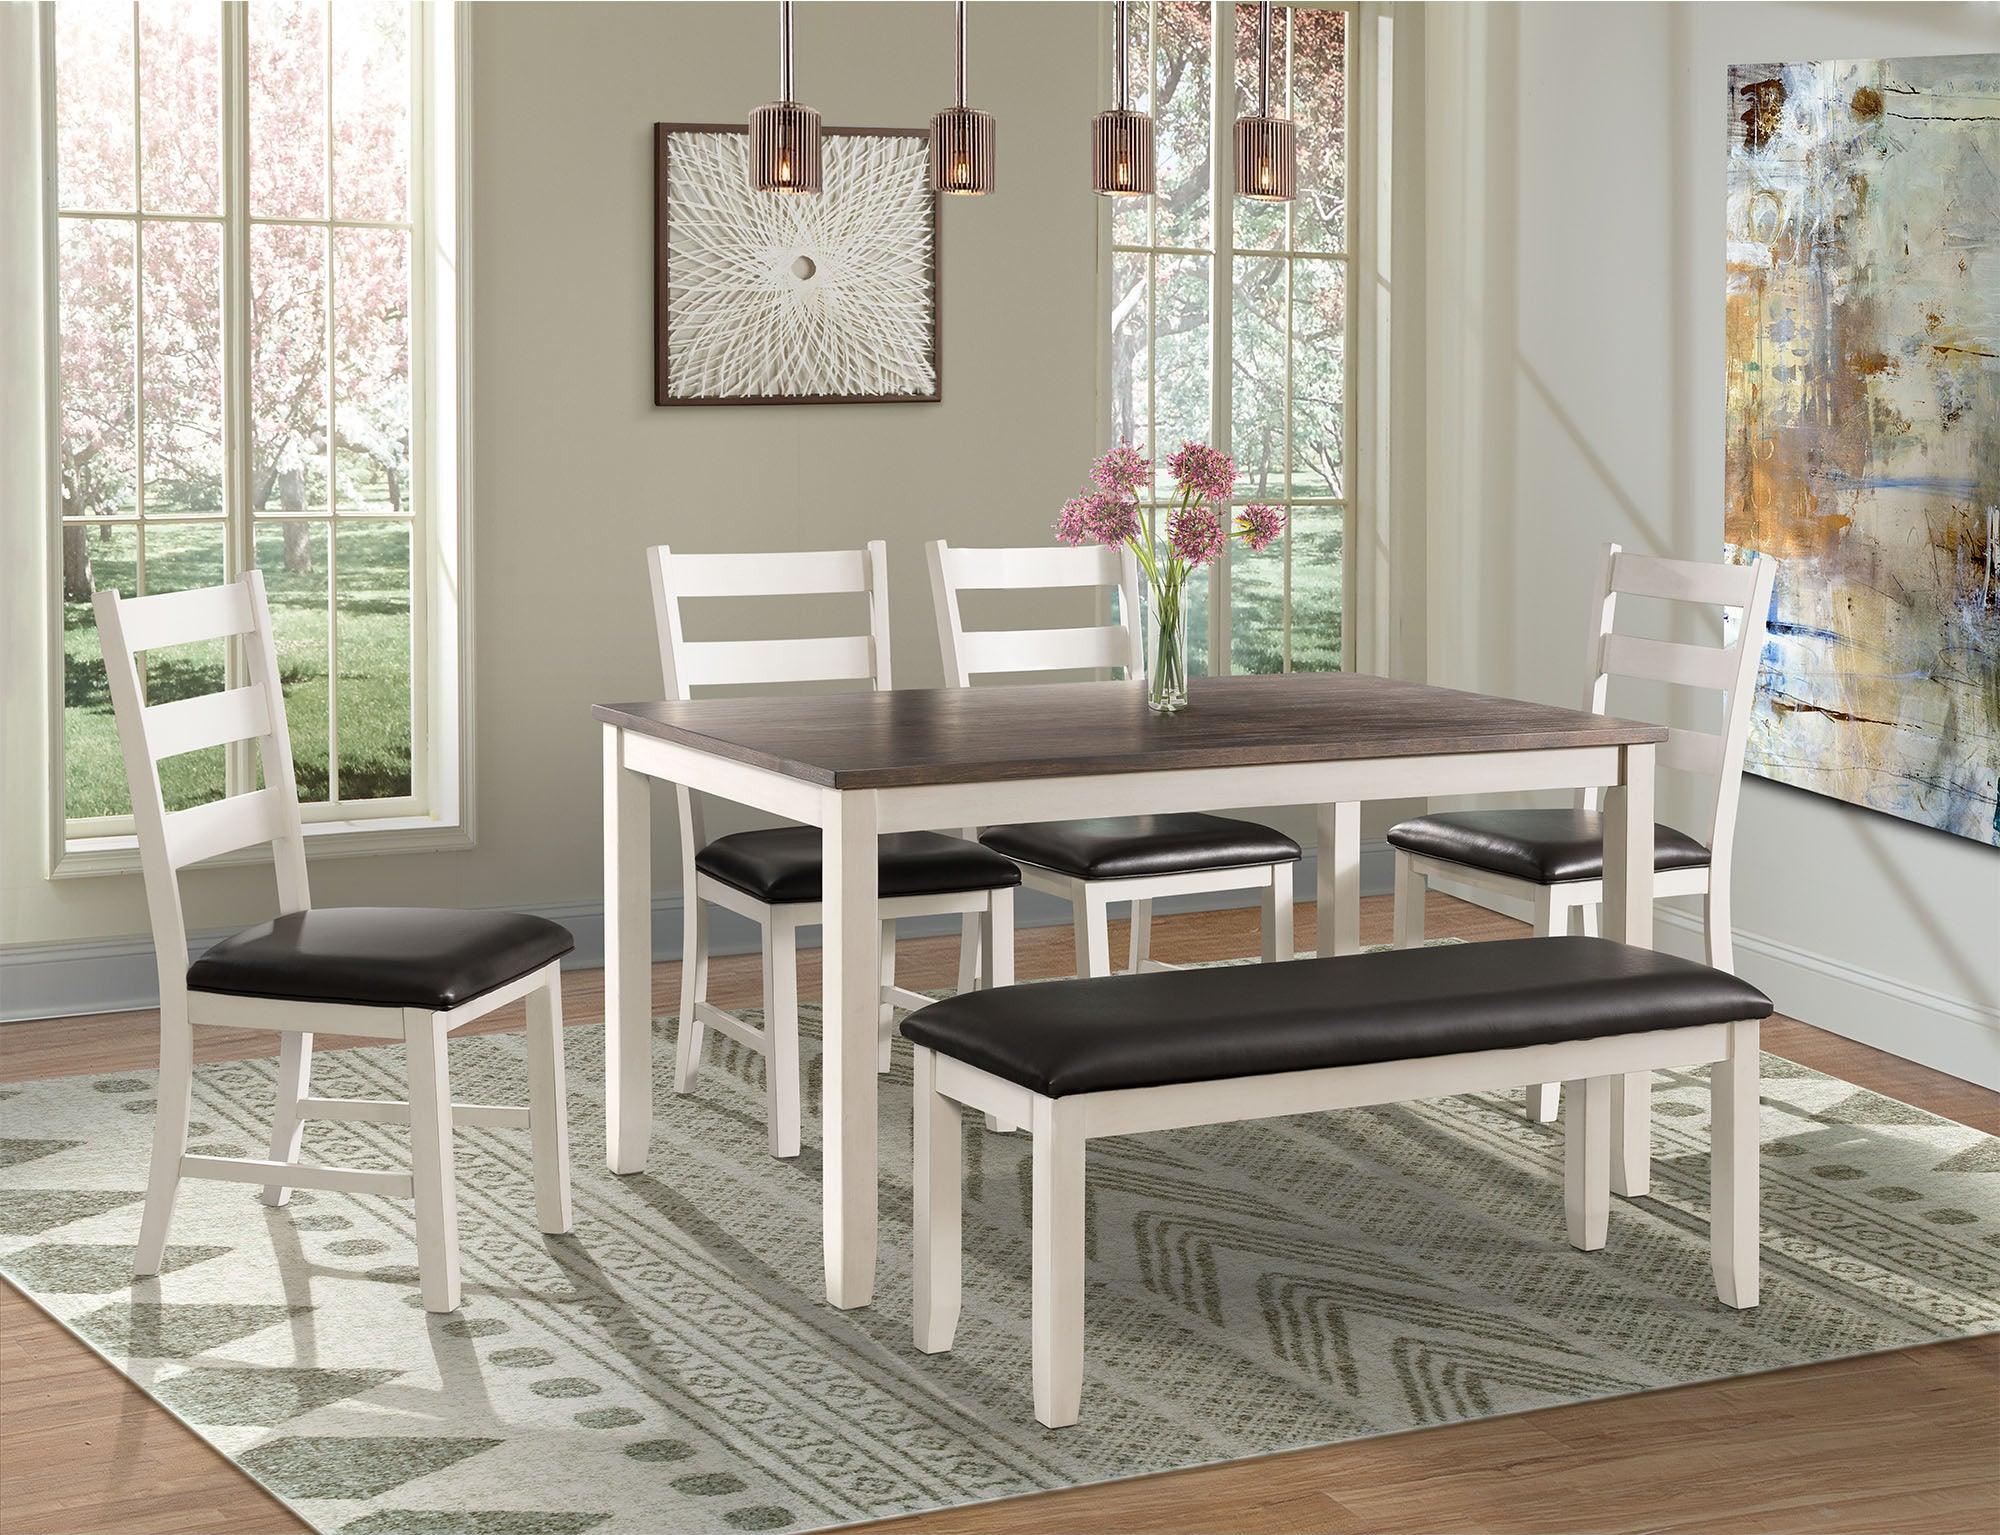 Elements Dining Sets - Kona Brown 6PC Dining Set-Table, Four Chairs & Bench